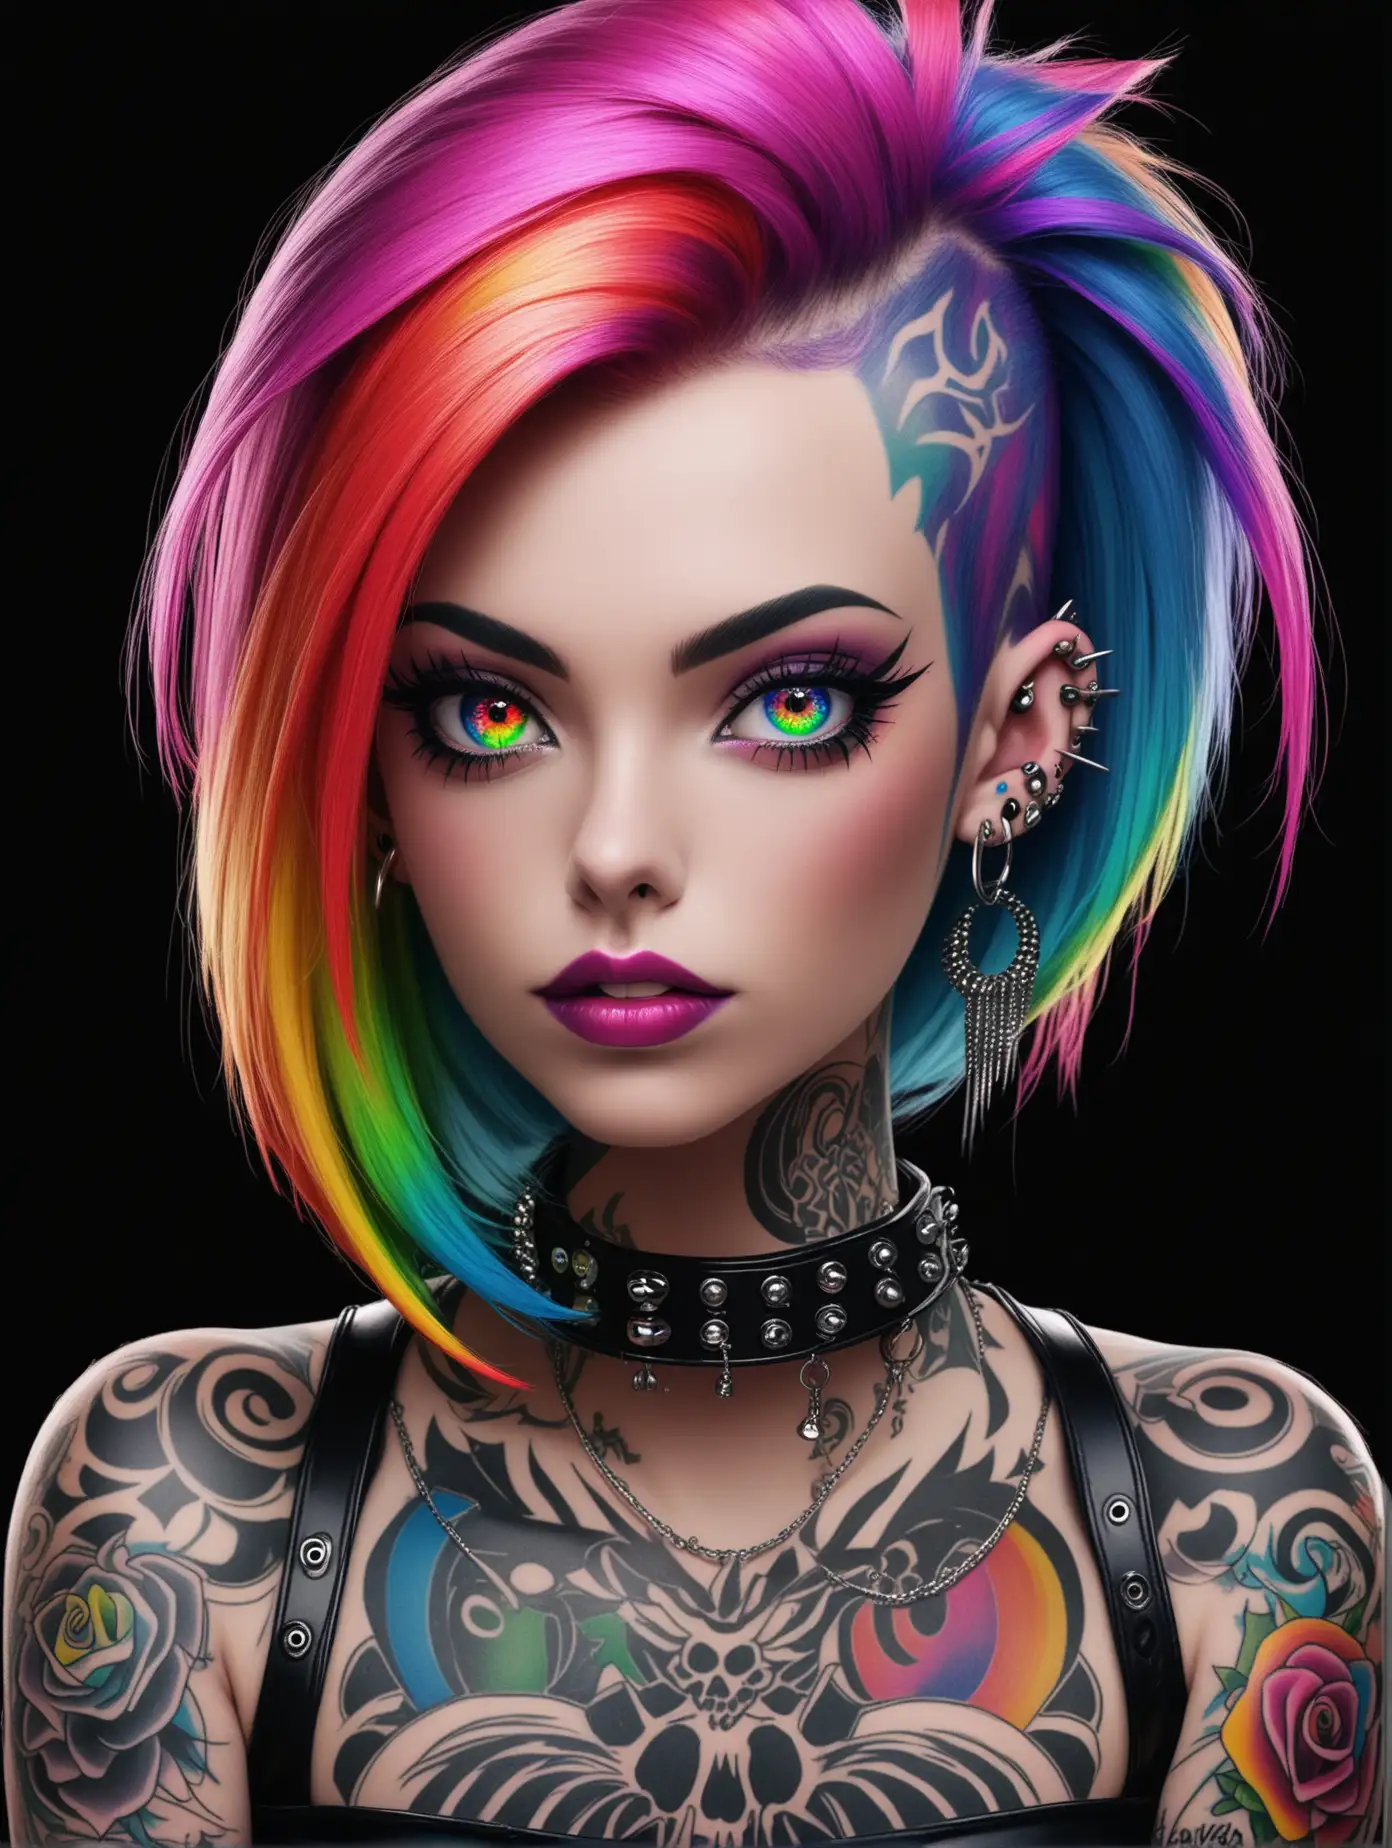 Portrait of a Punk Woman with Rainbow Colored Hair and Tattoos on Glossy Black Background